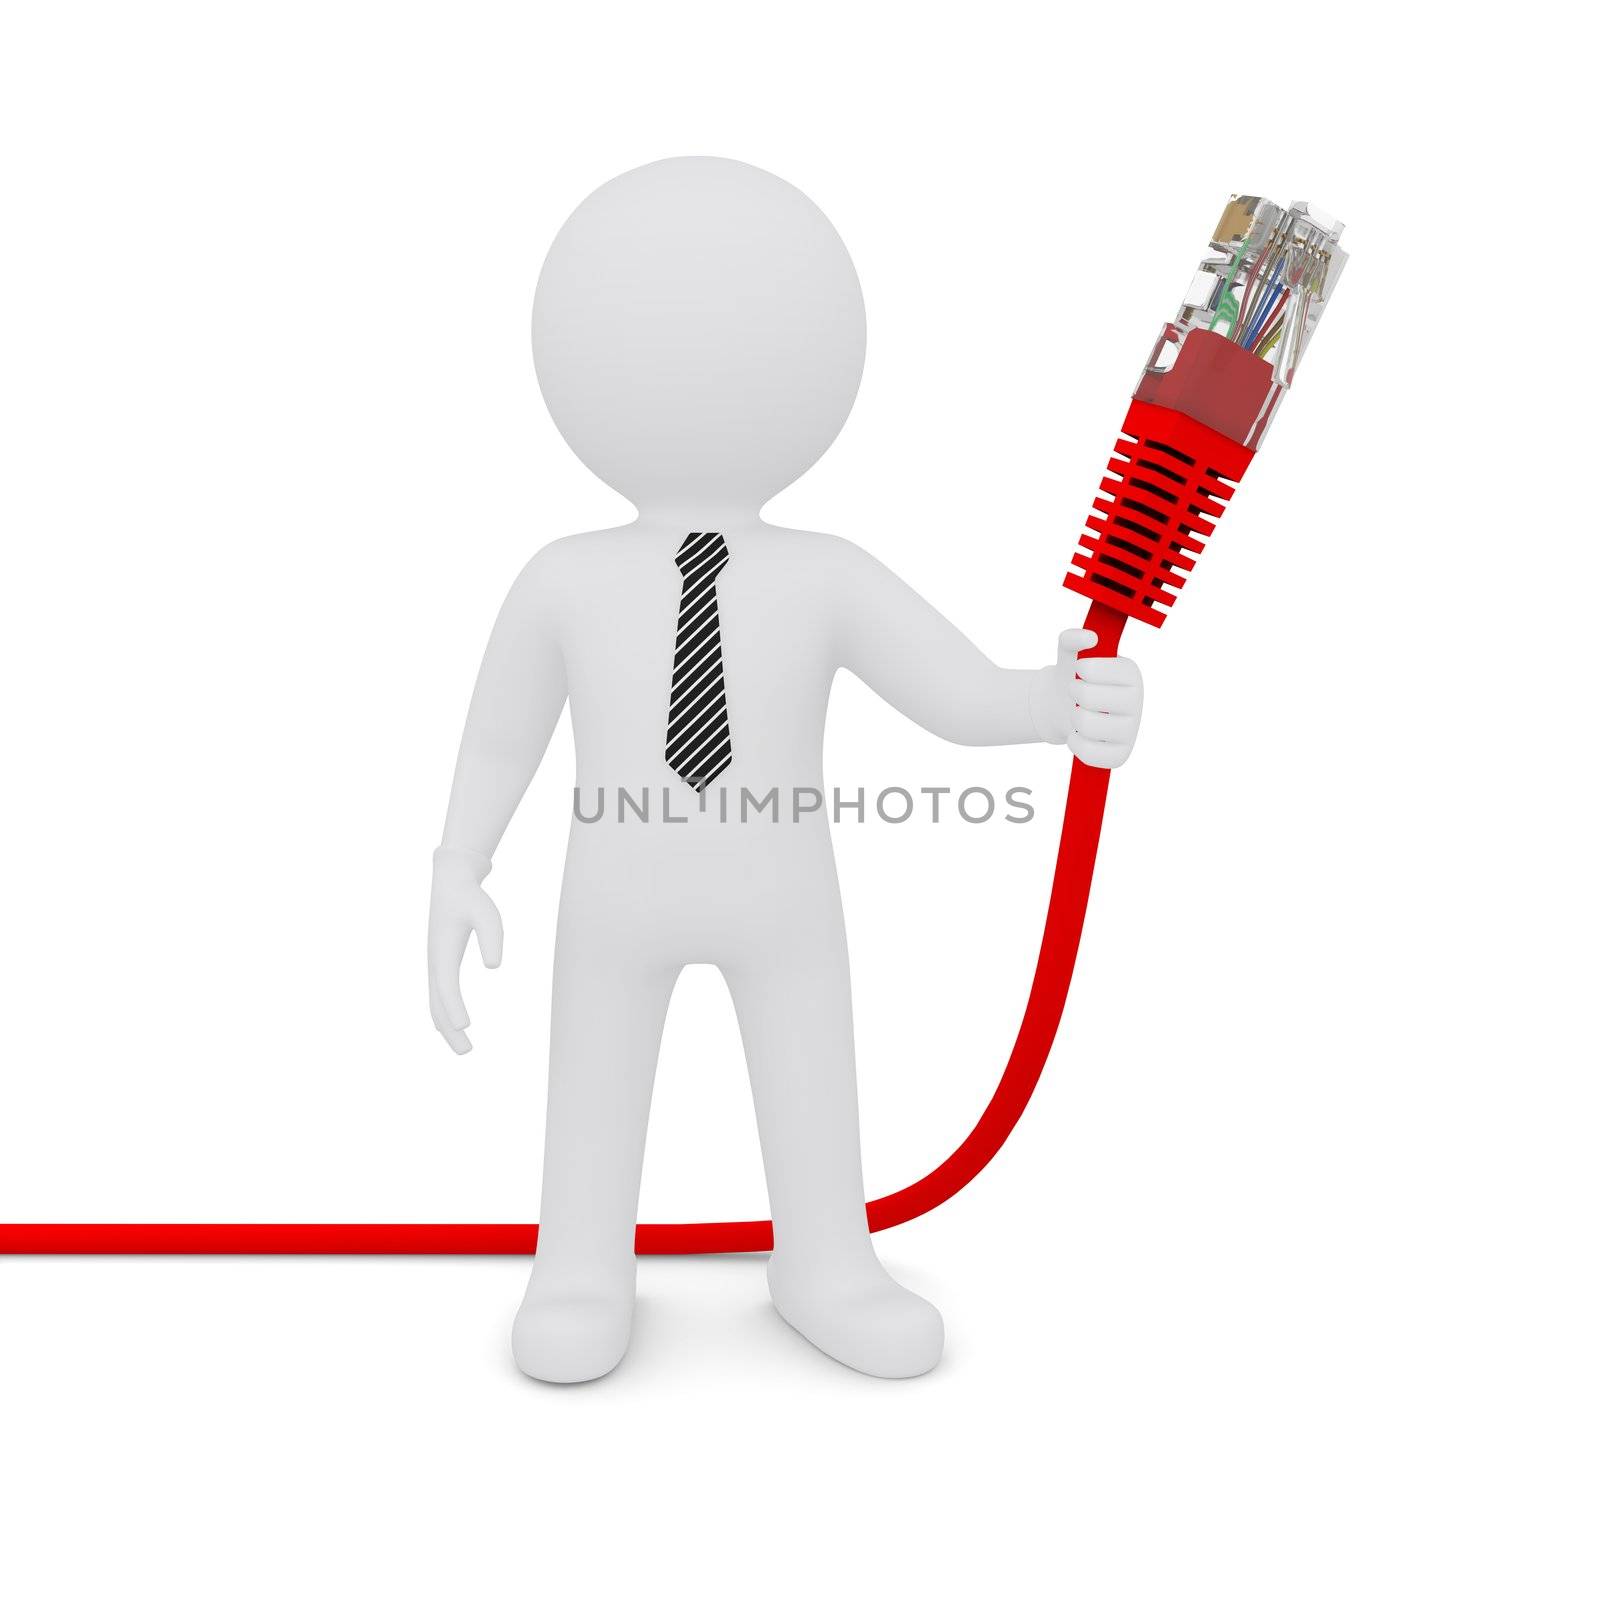 The white man holding a red network cable. Isolated on white background